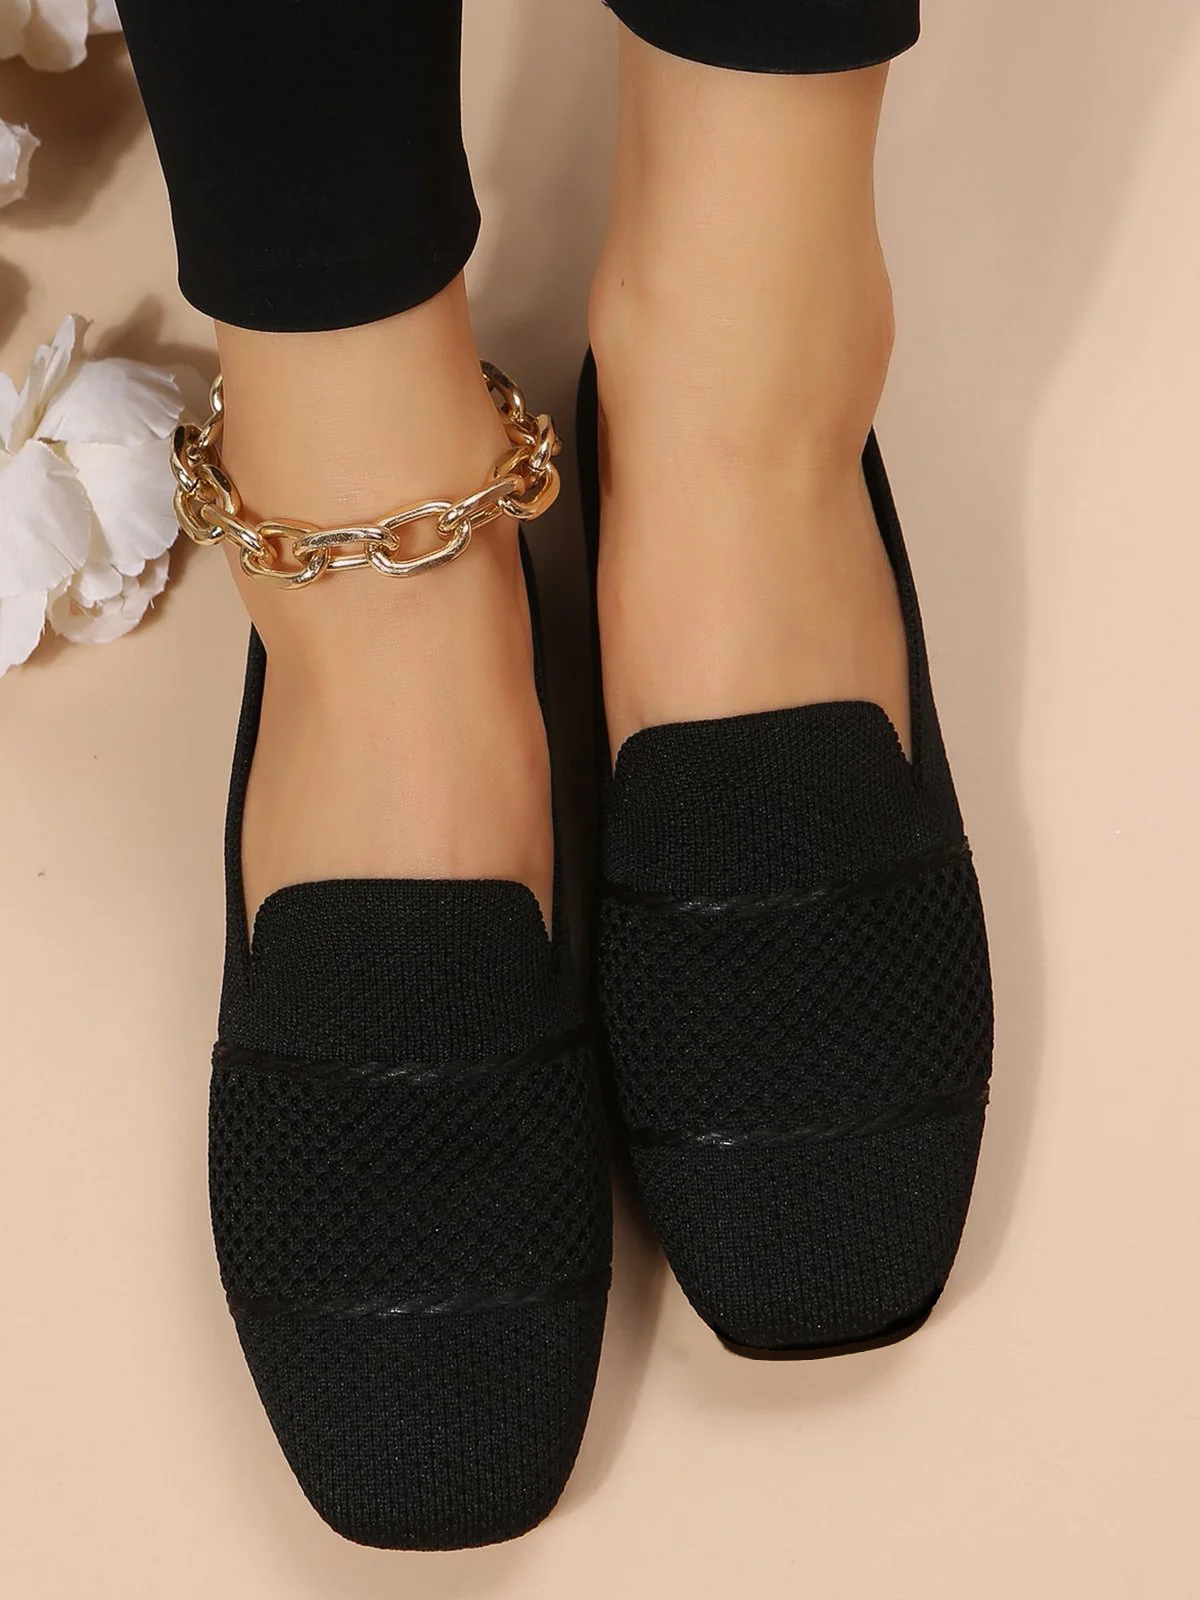 Women Hollow Out Comfy Square Toe Mesh Fabric Shoes